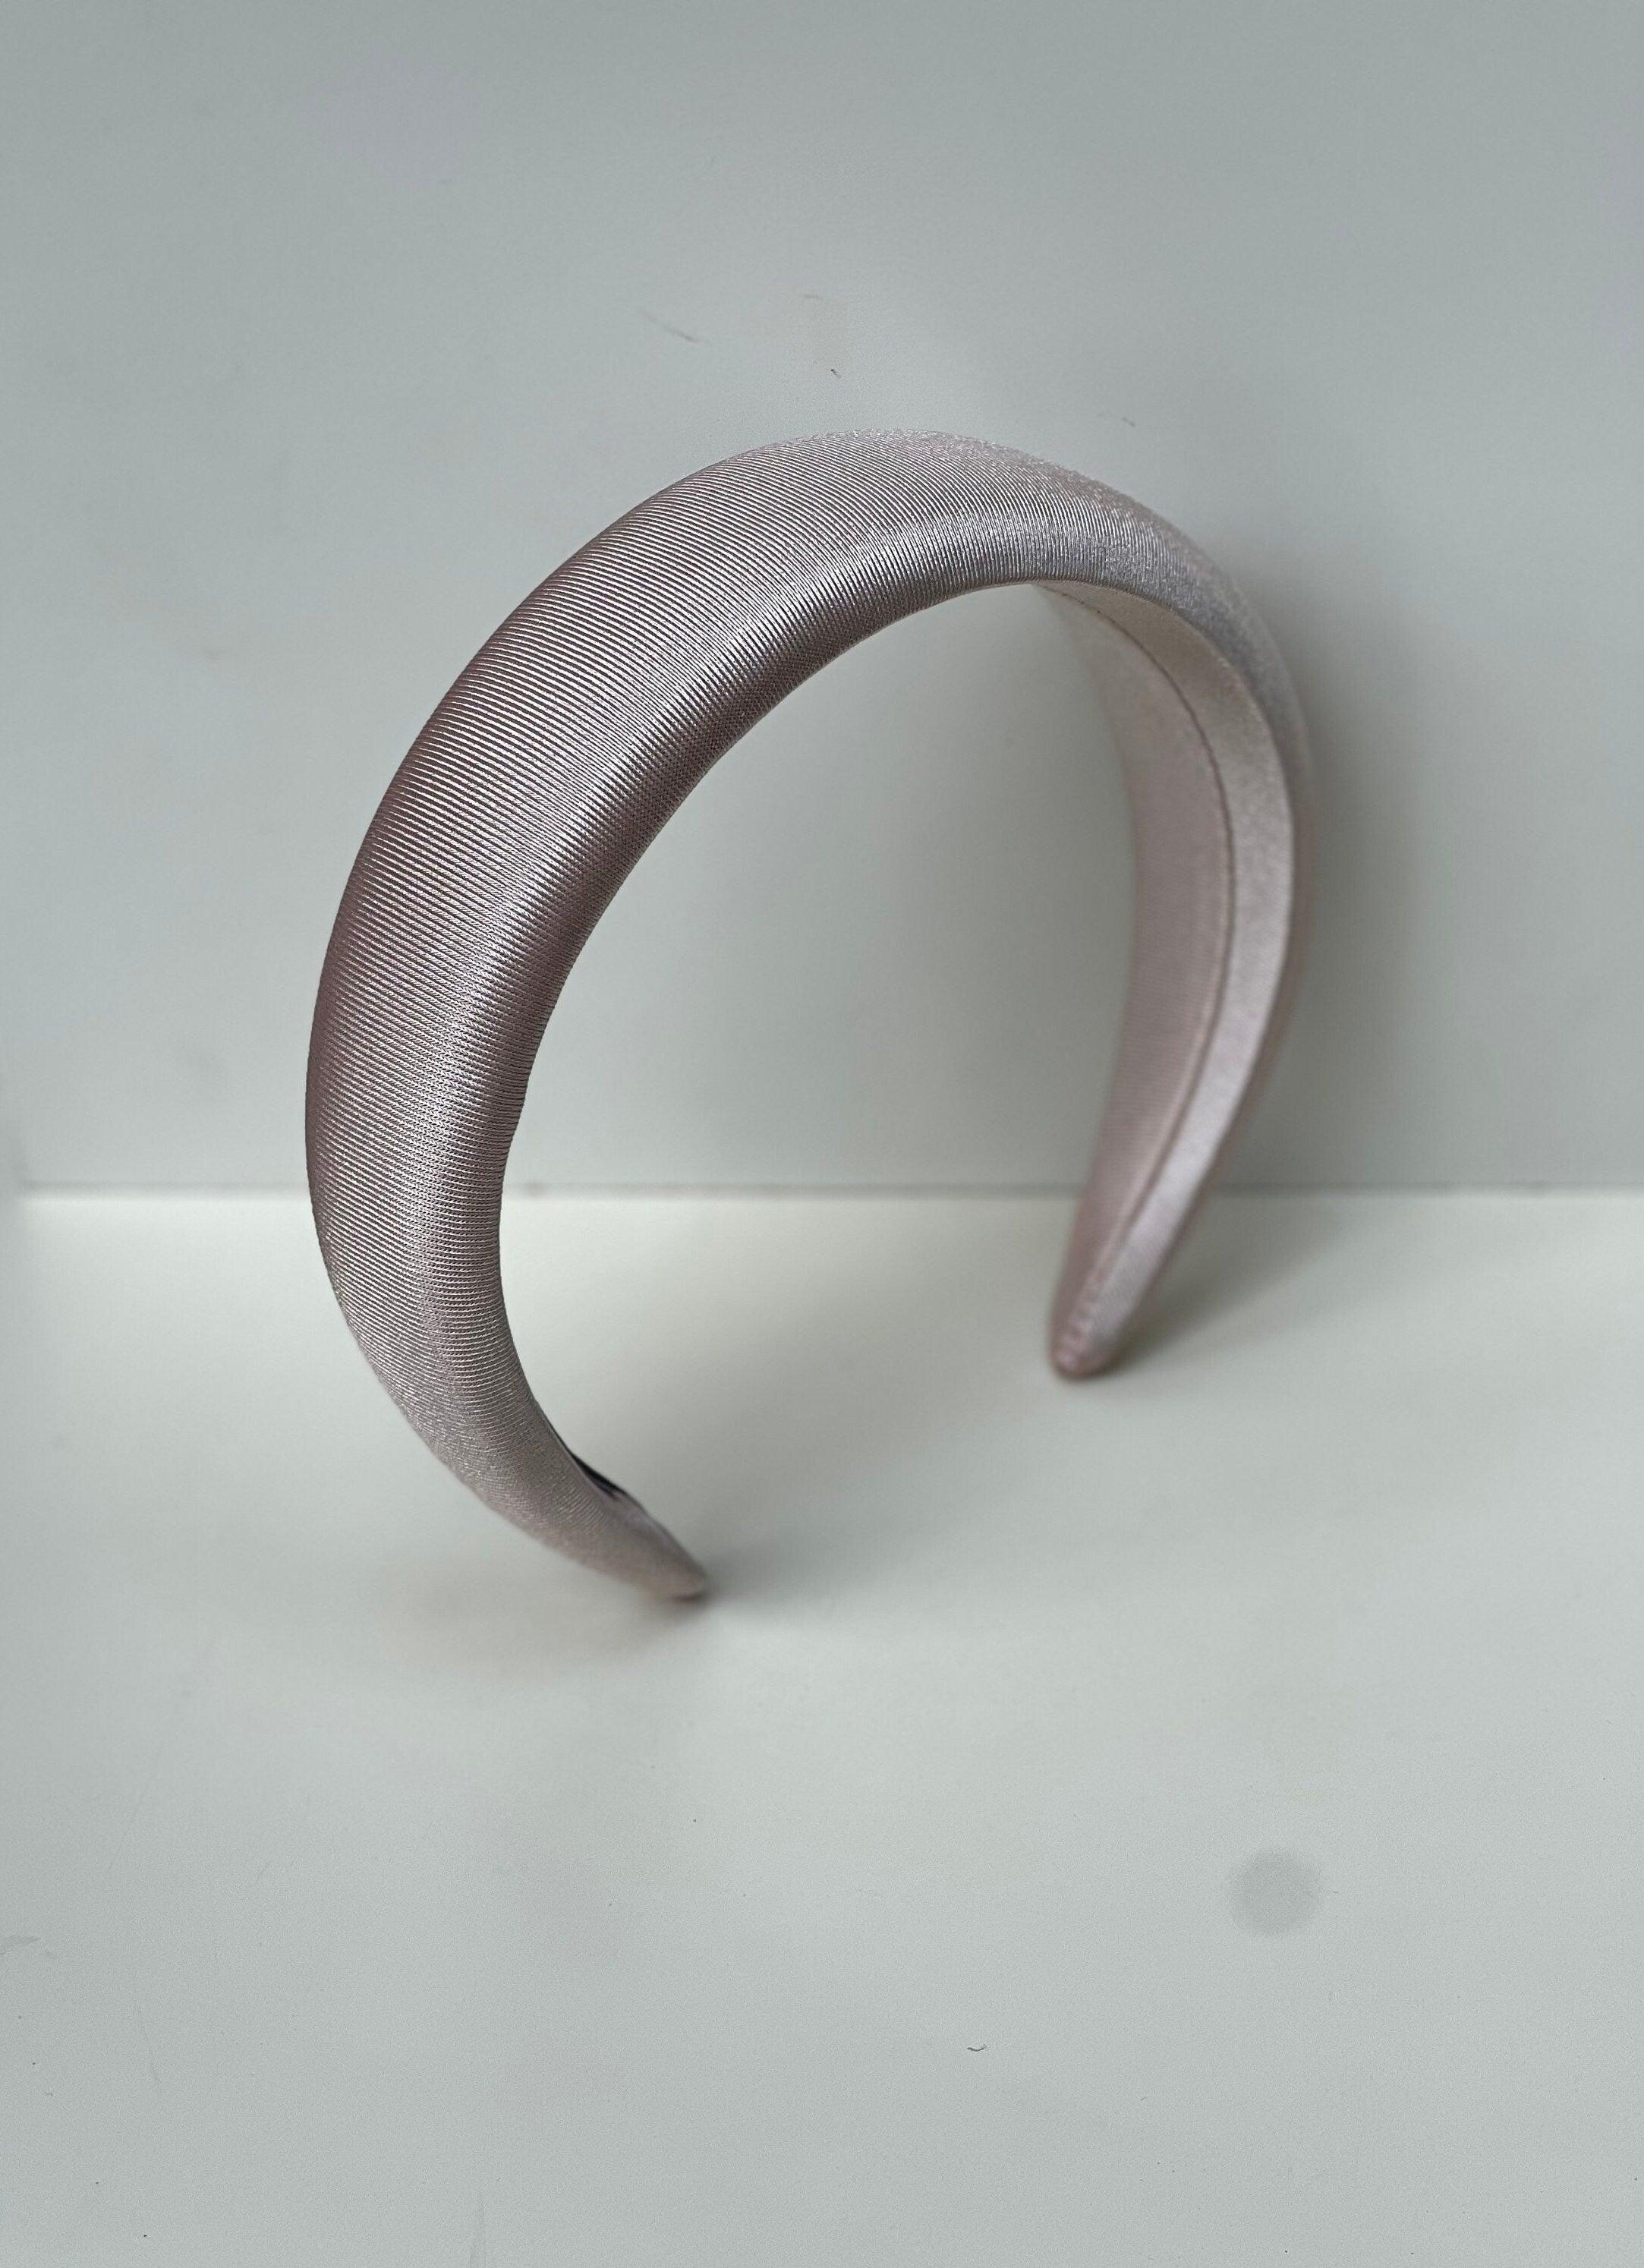 Delicate Beige Satin Padded Headband - Stylish Retro Accessory for Women in Light Cream Color available at Moyoni Design